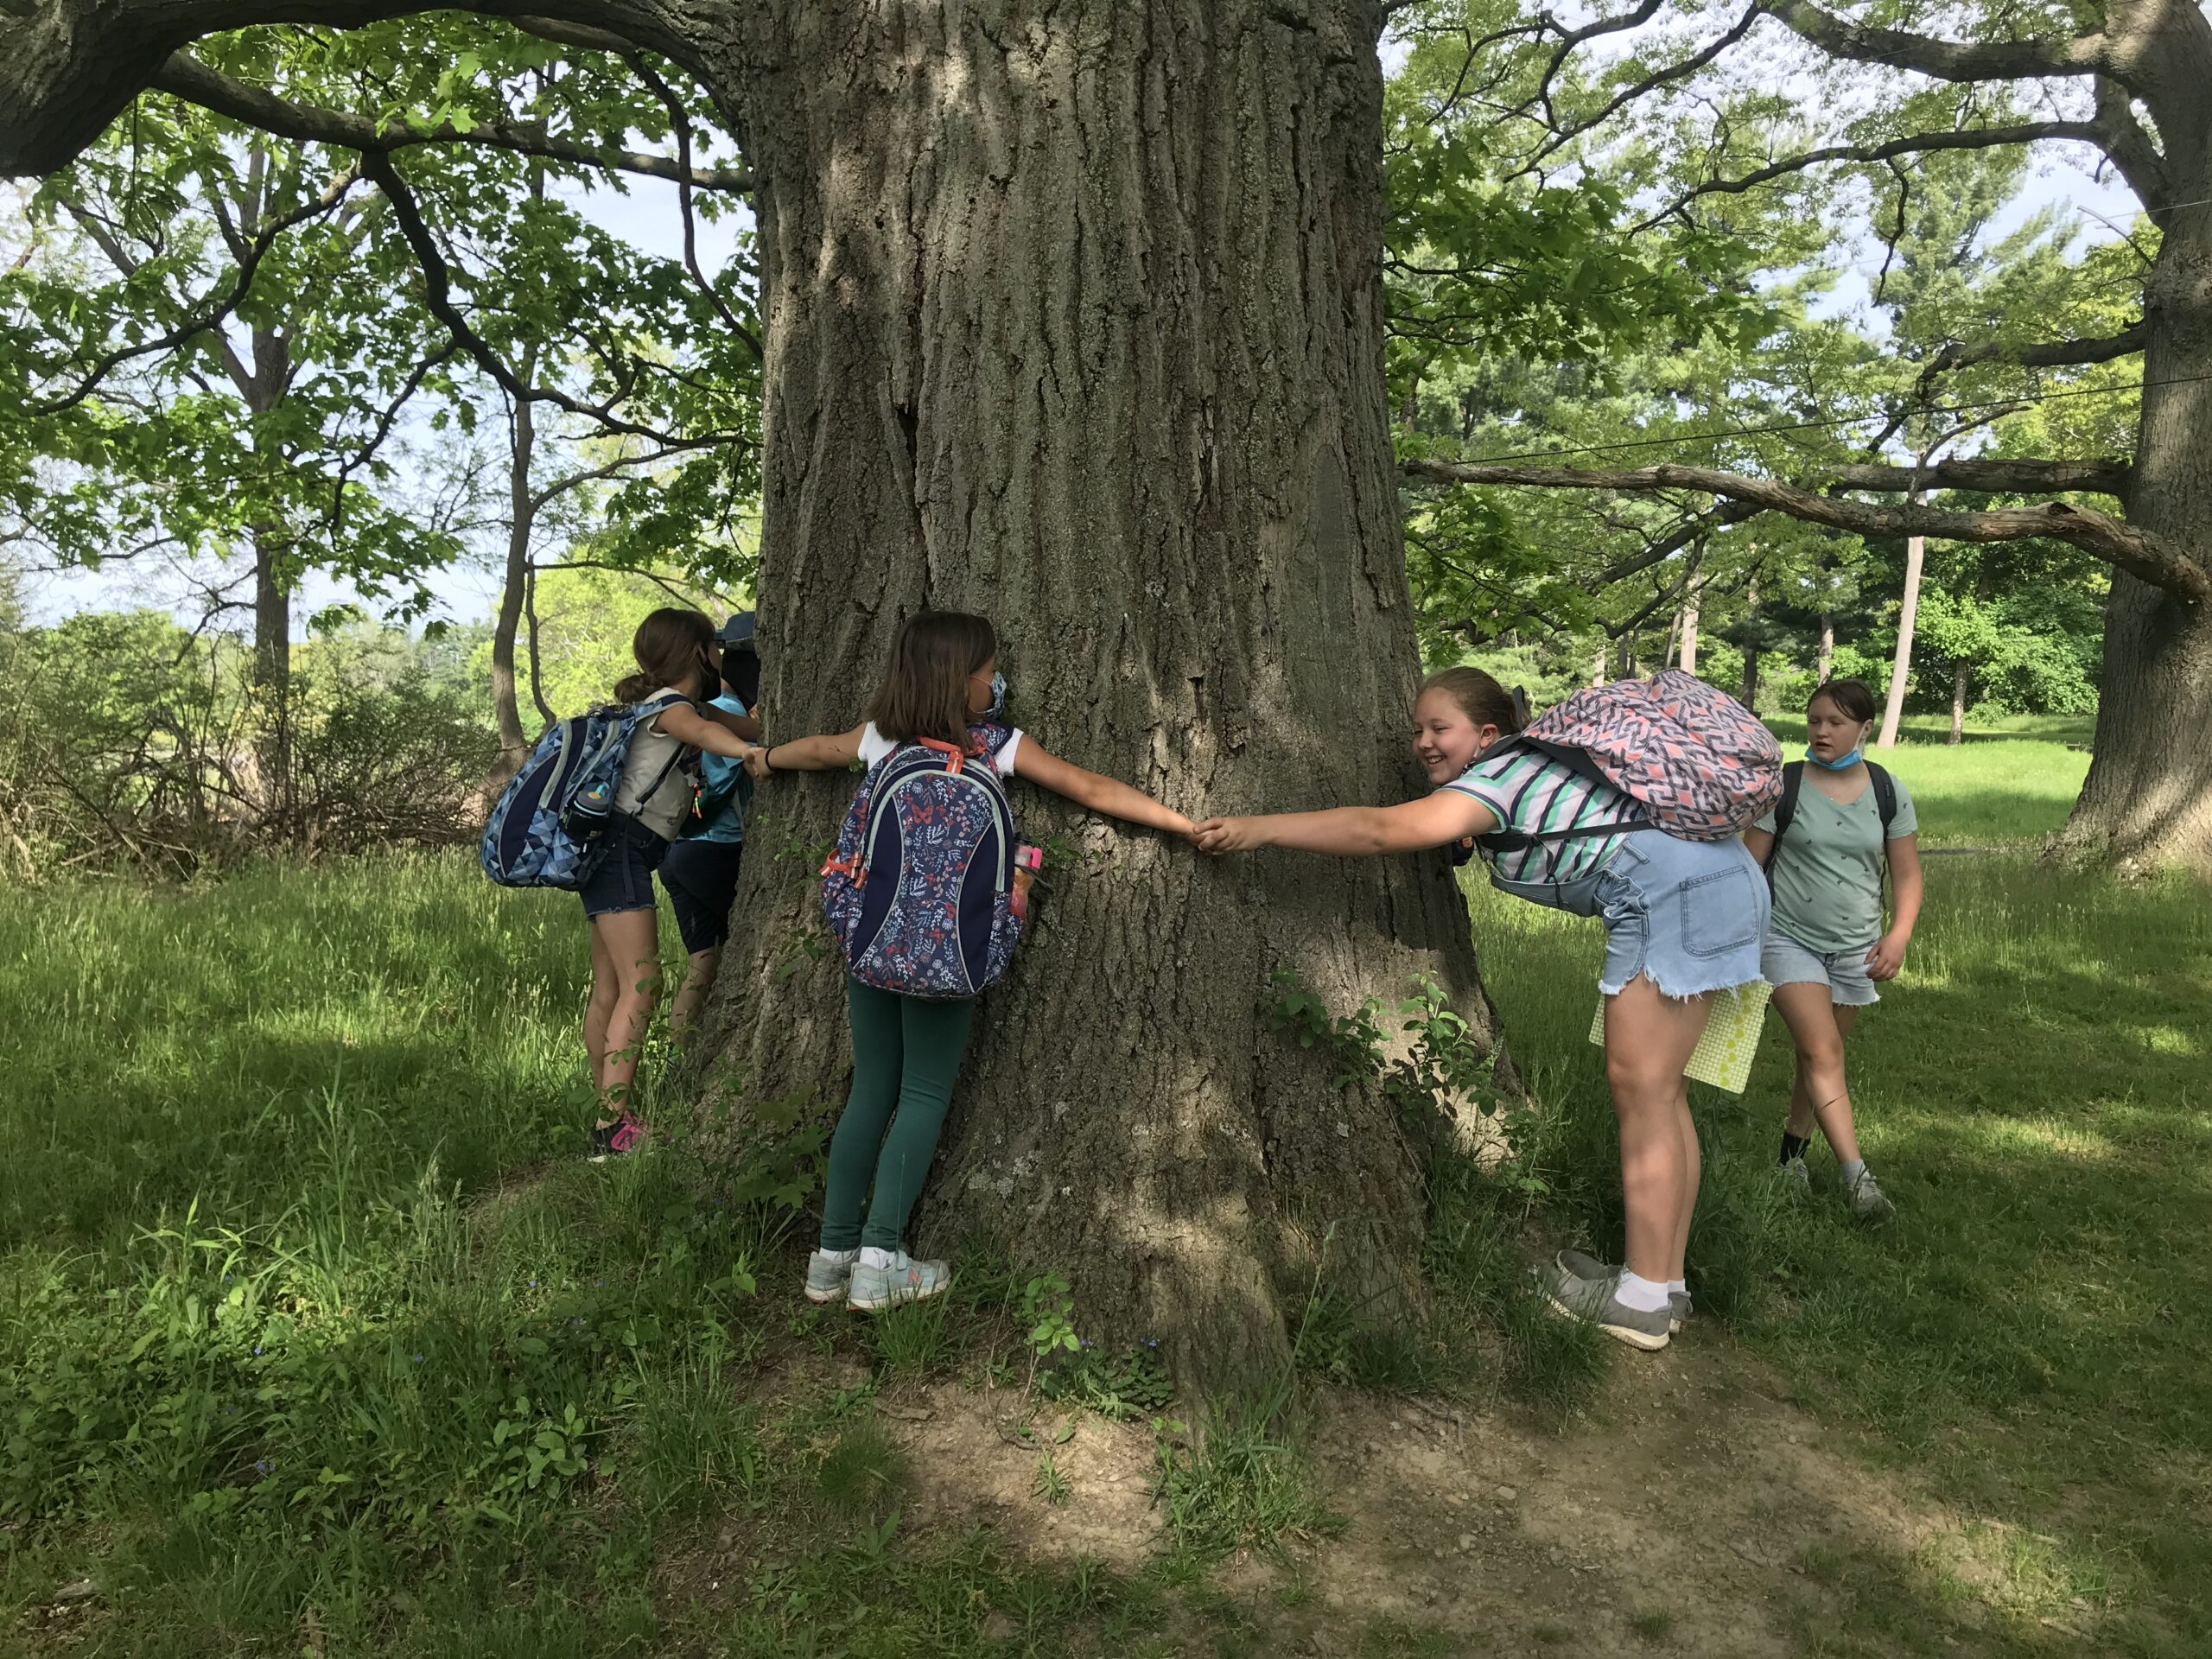 A mighty oak at Knox Farm State Park